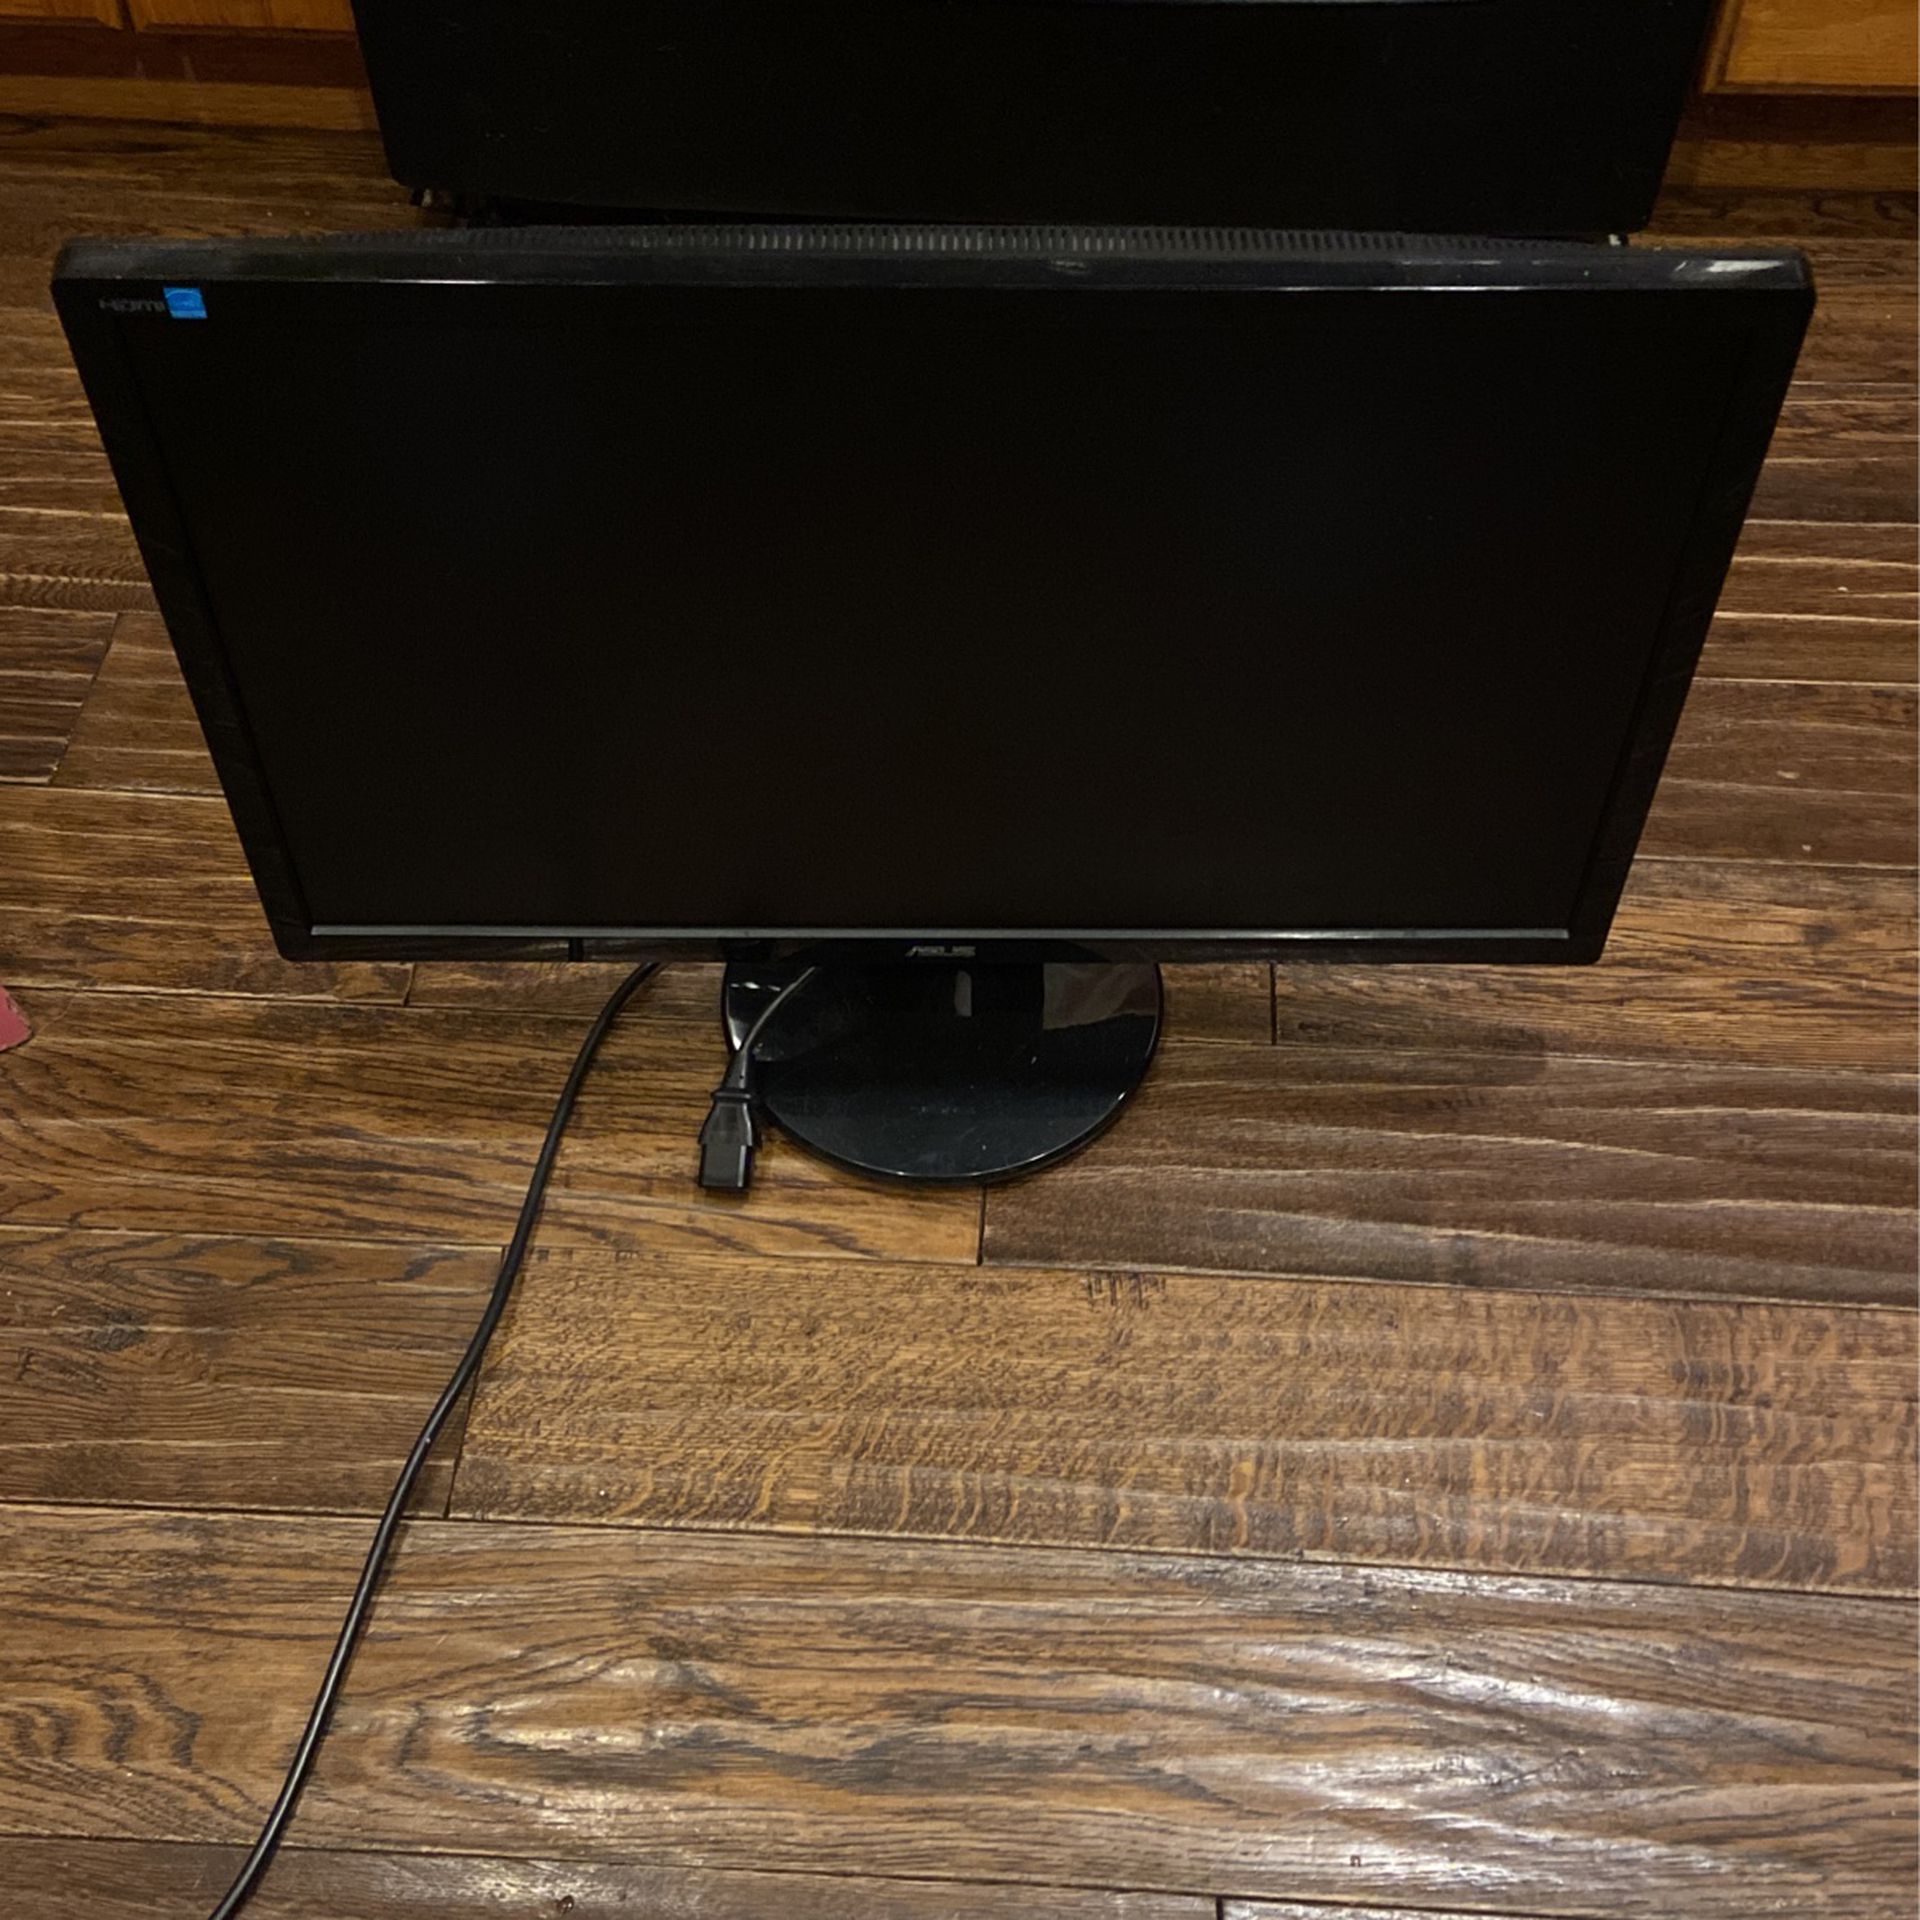 Asus Ve248h Widescreen Monitor (Price Negotiable) 